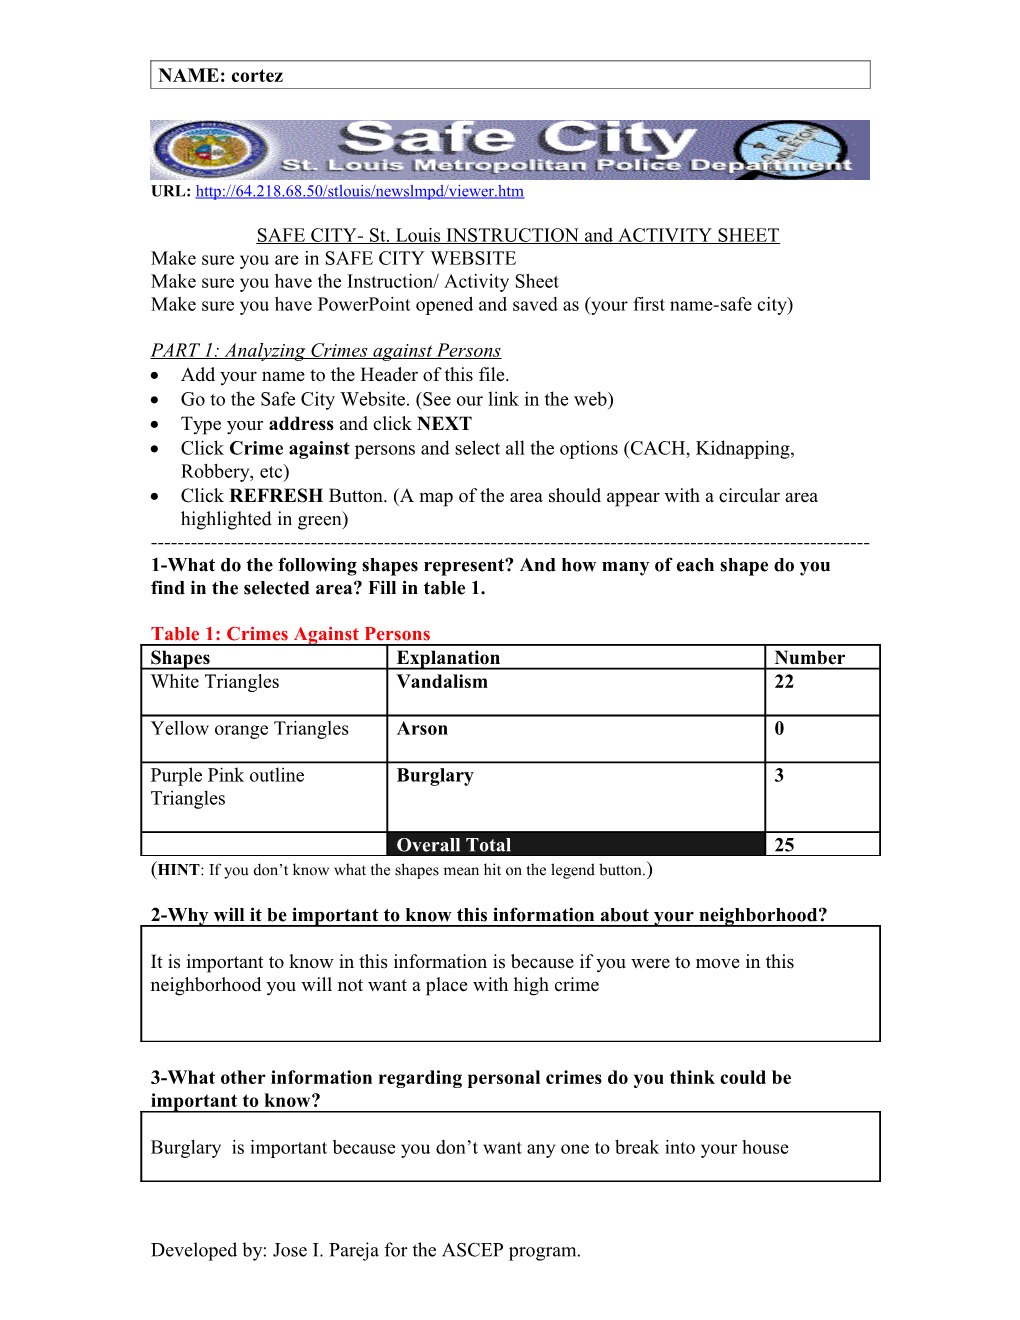 SAFE CITY- St. Louis INSTRUCTION and ACTIVITY SHEET